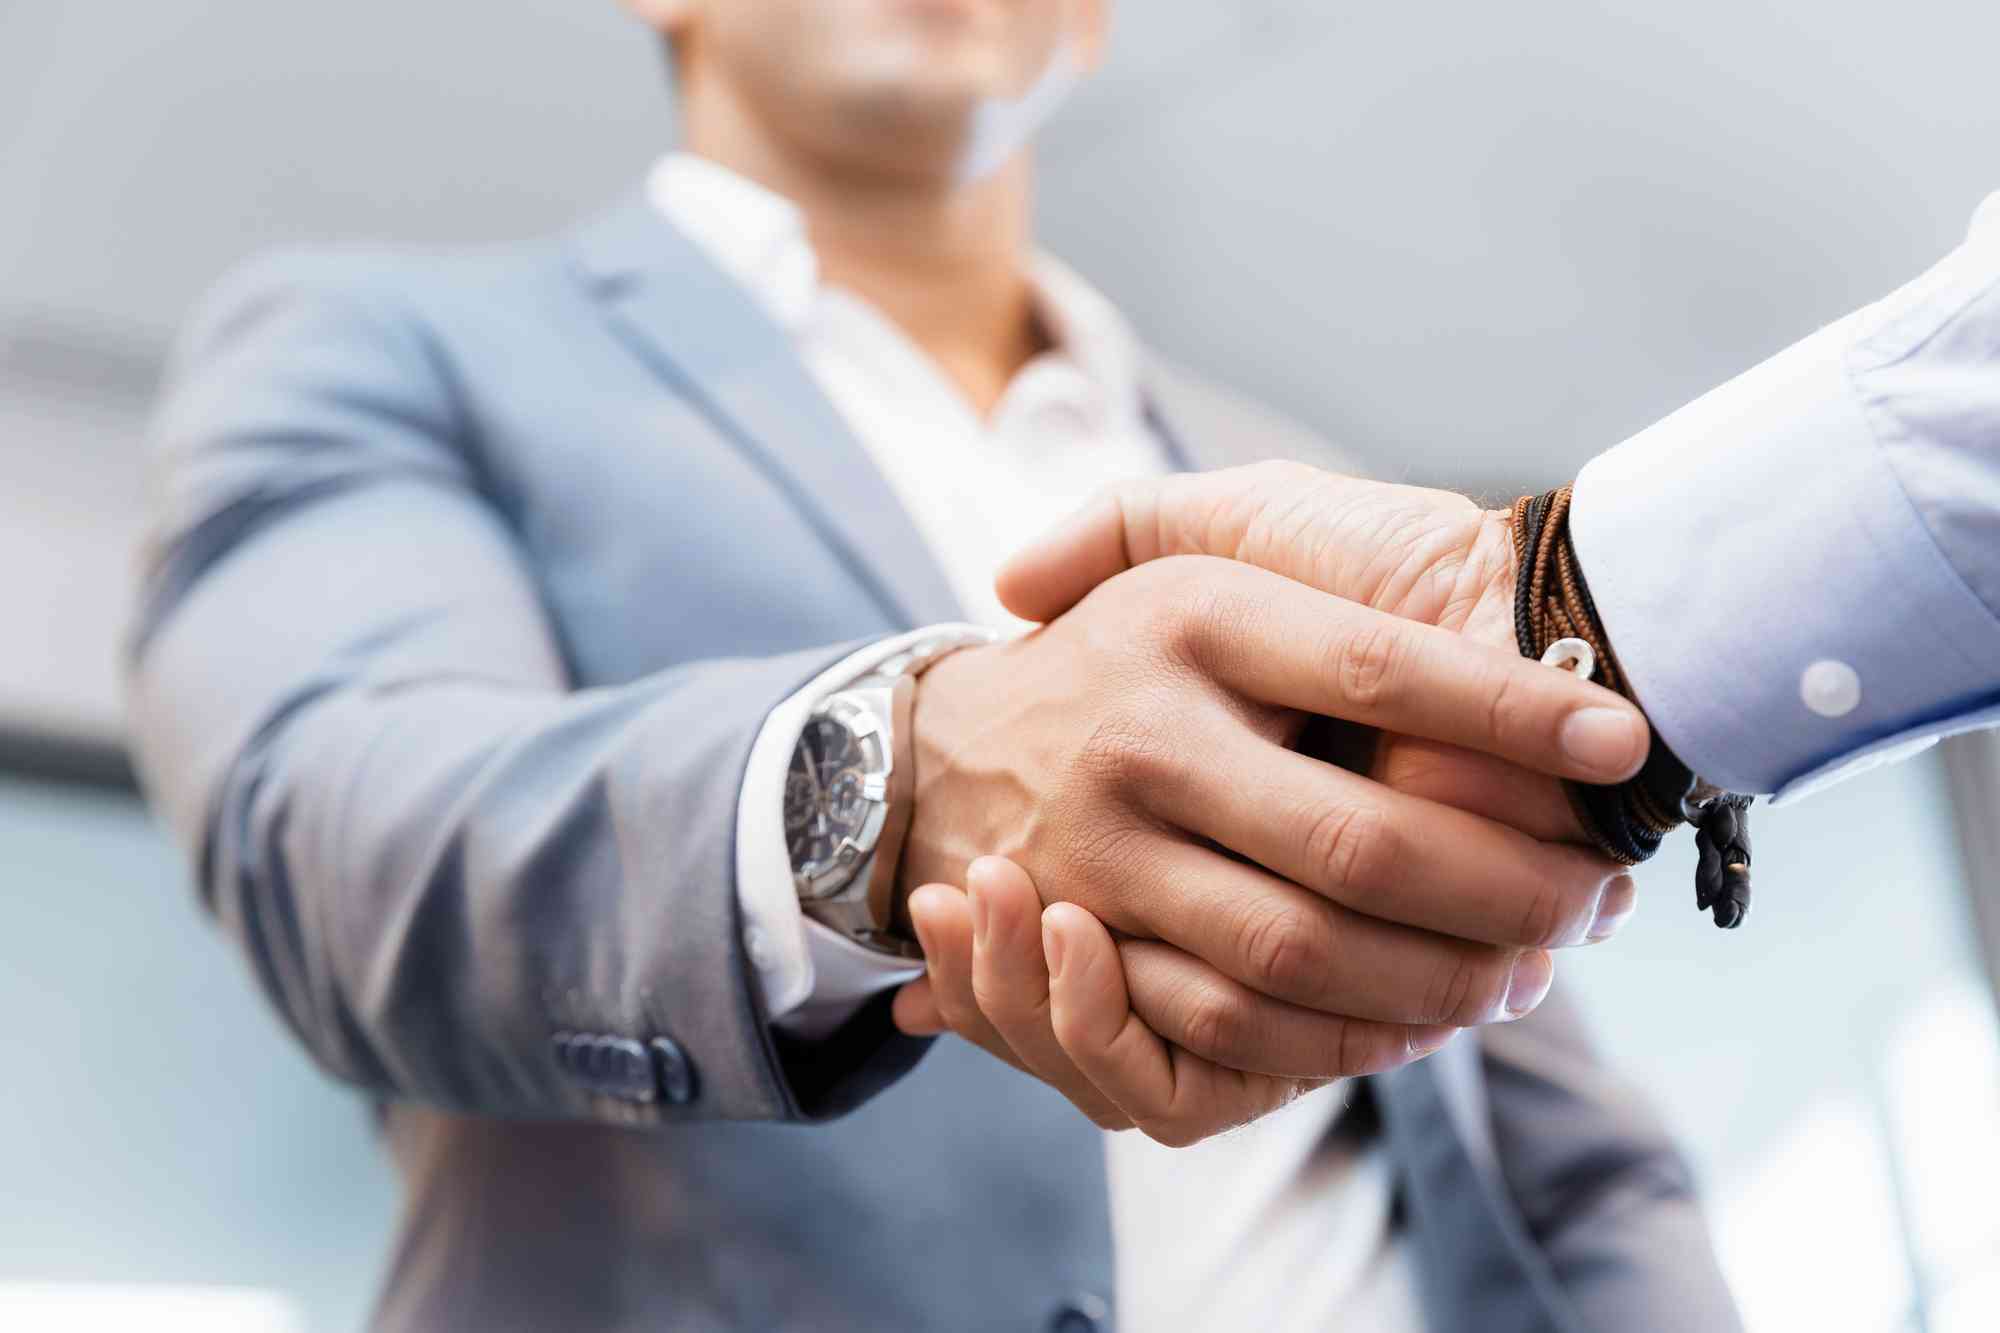 Two business professionals shaking hands, focus on hands with blurred office background, emphasizing a formal agreement or greeting in their functional specialties.